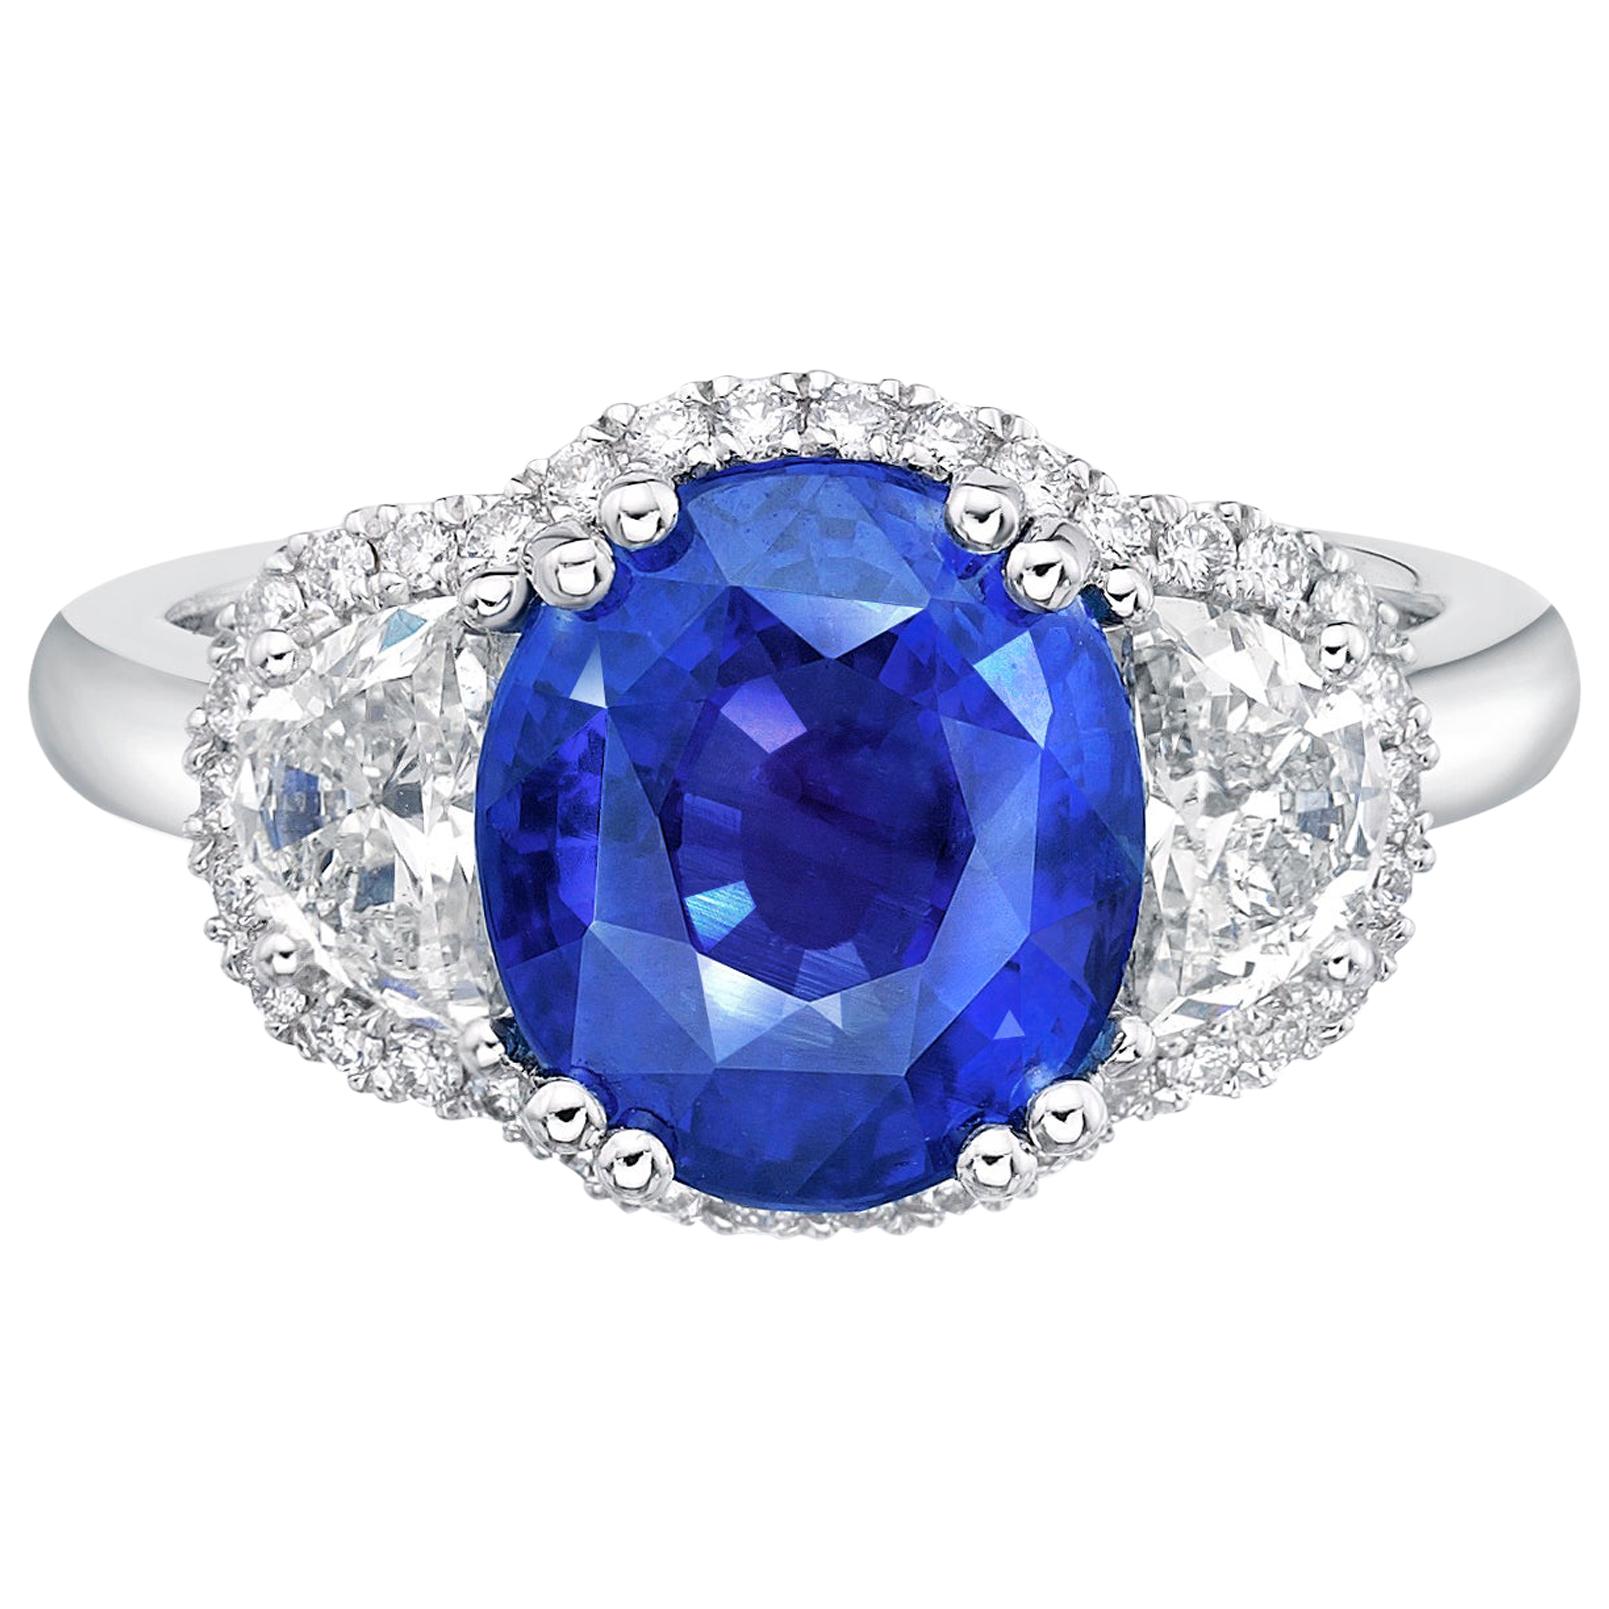 4.55 ct Unheated Vivid Royal Blue Sapphire Oval GRS Certified Ceylon Ring